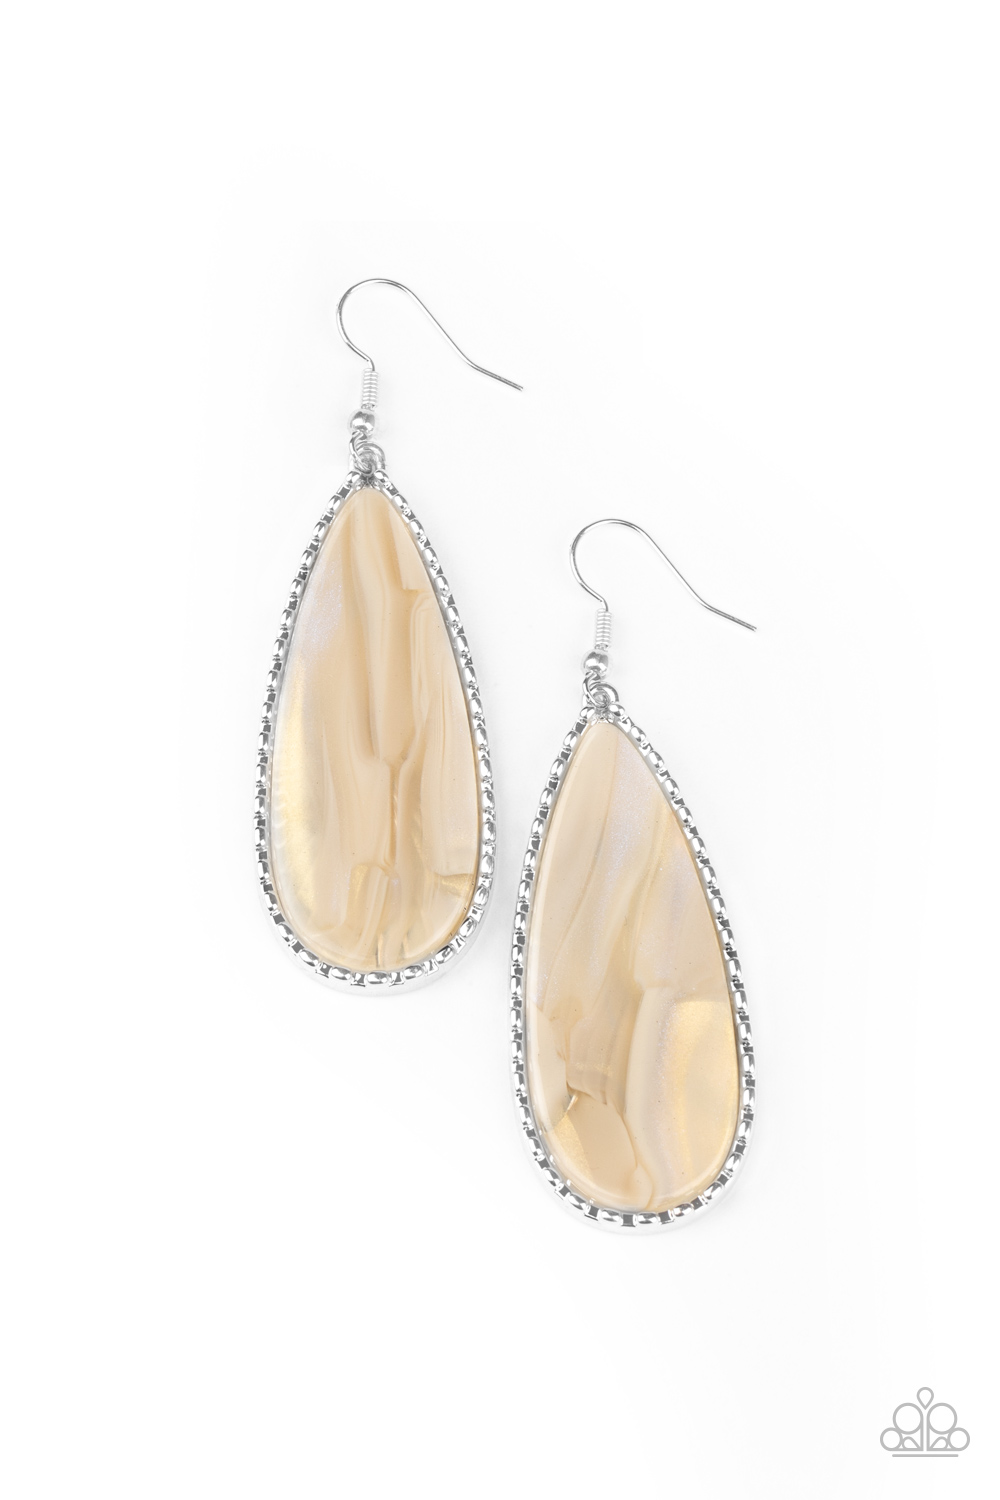 Earring - Ethereal Eloquence - White